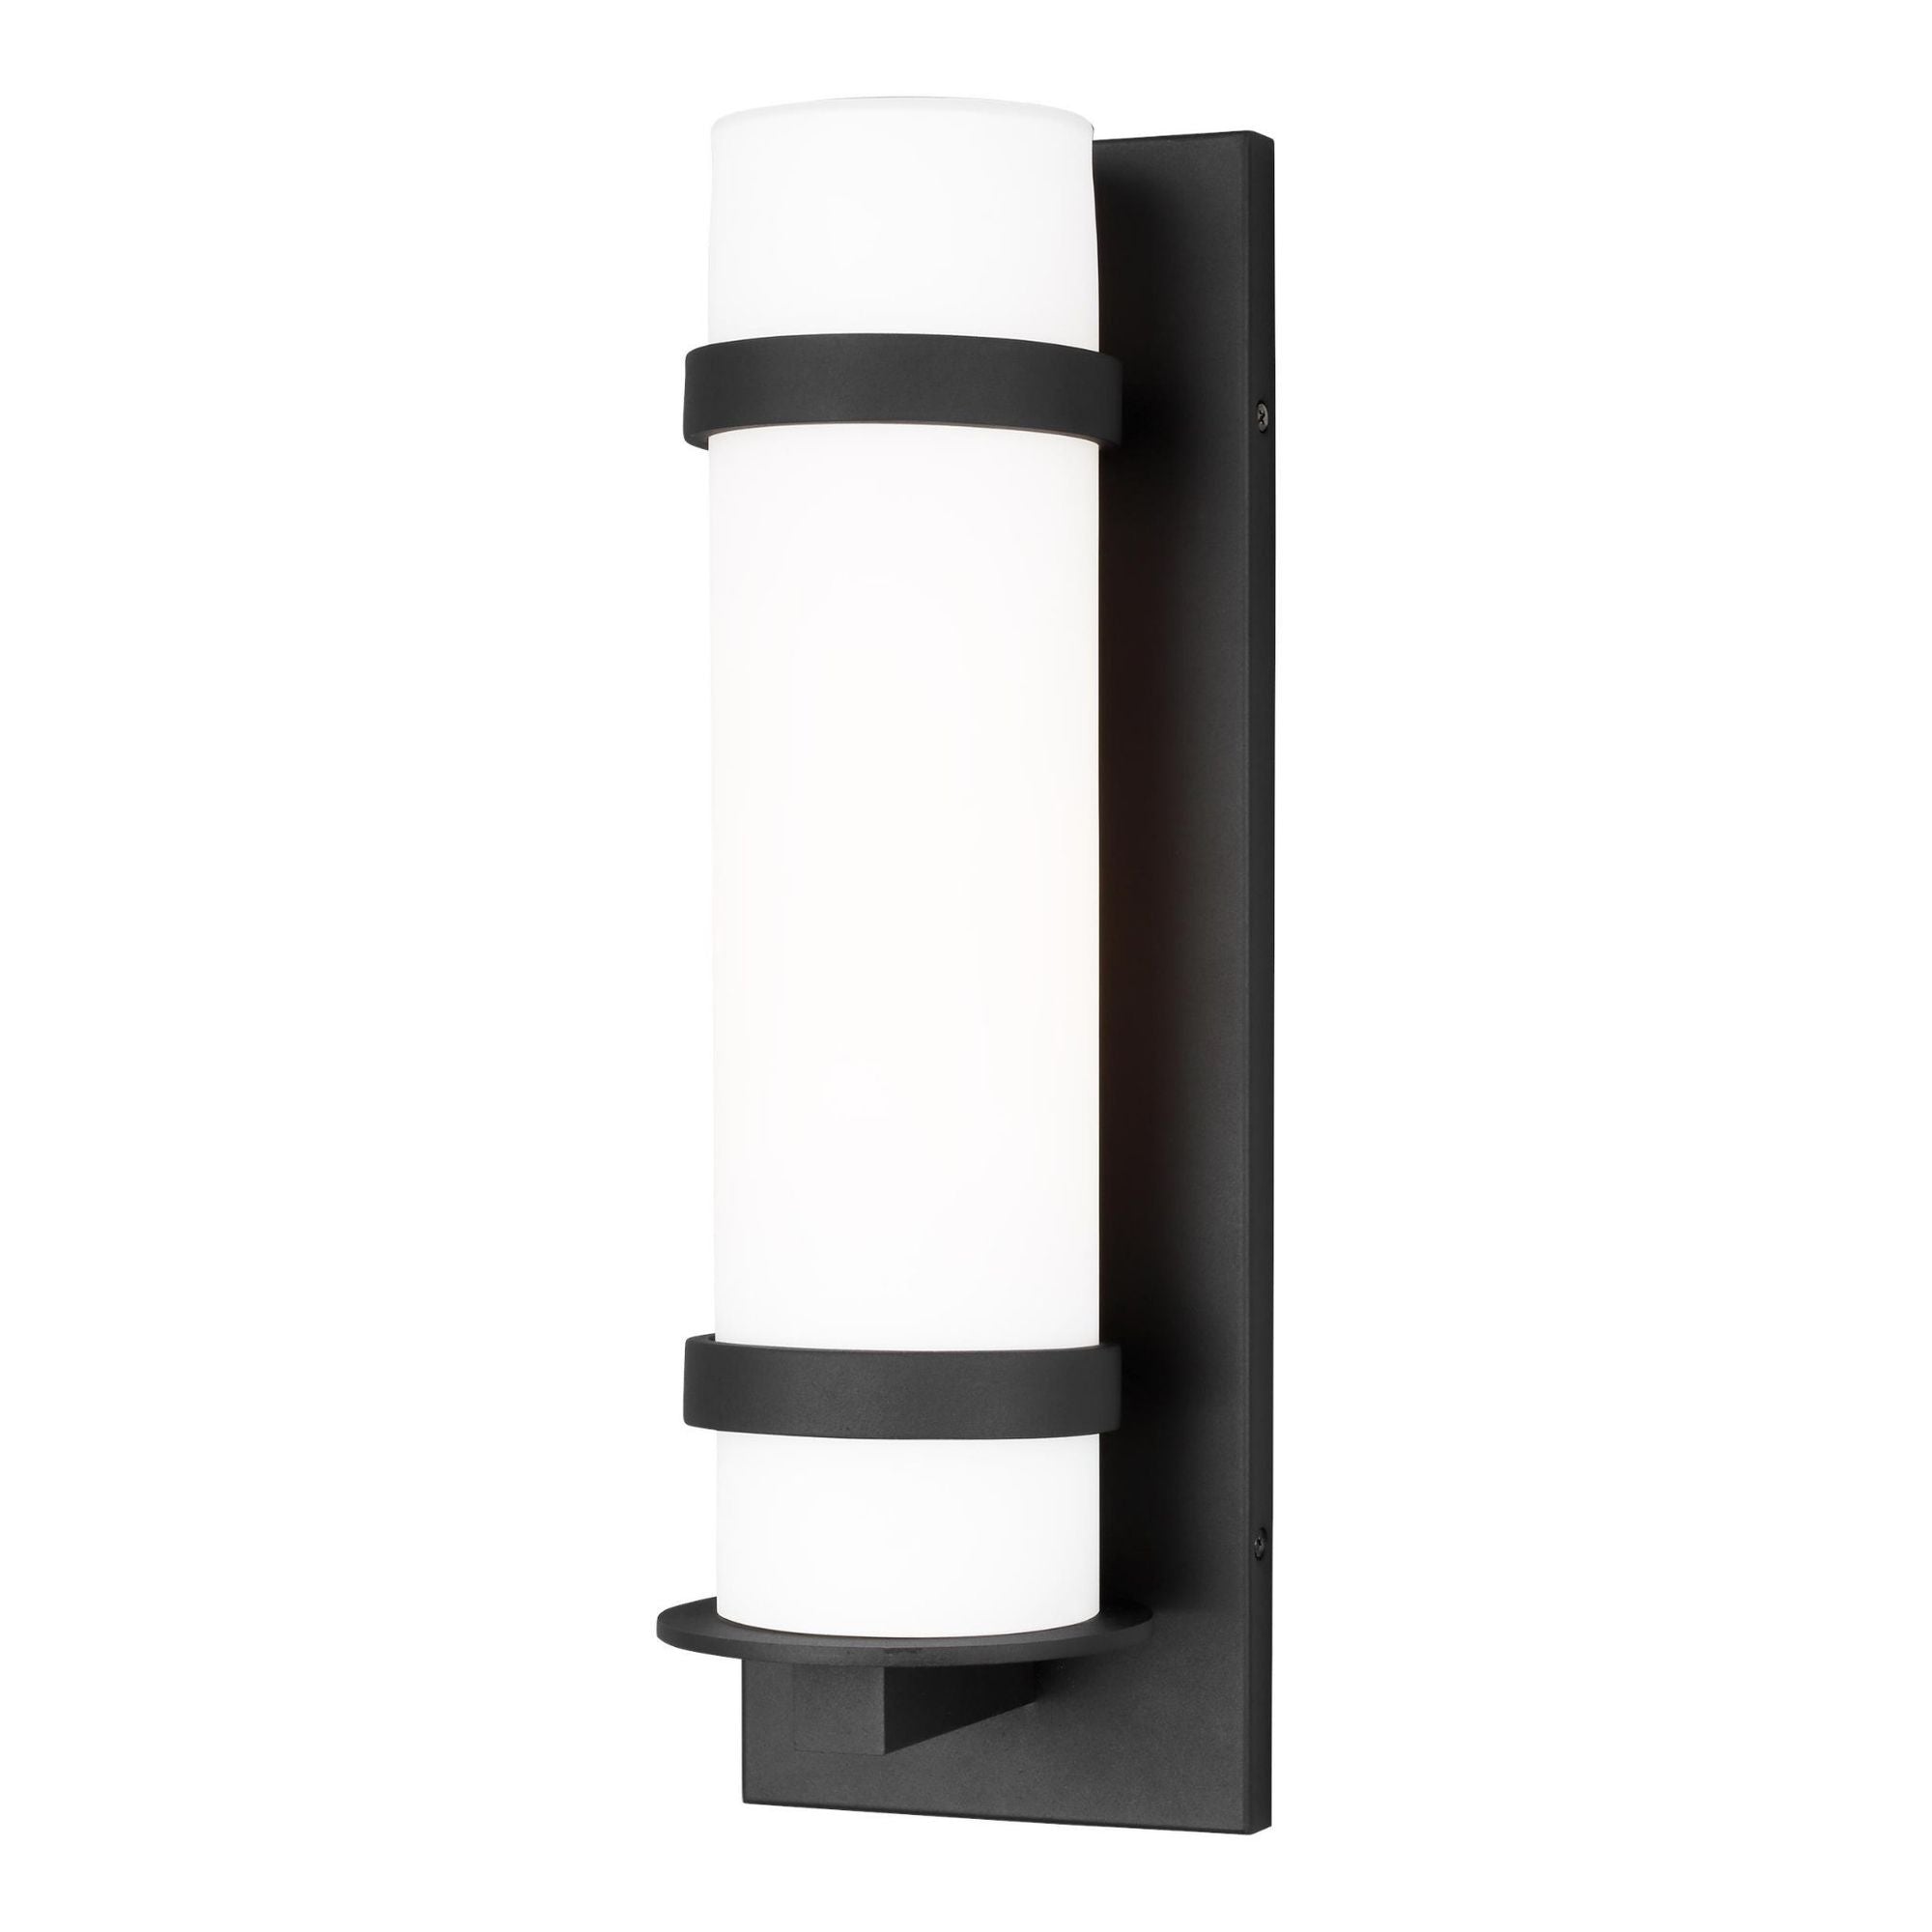 Alban Medium One Light Outdoor Wall Lantern LED Modern Fixture 6" Width 18" Height Aluminum Round Etched Opal Shade in Black